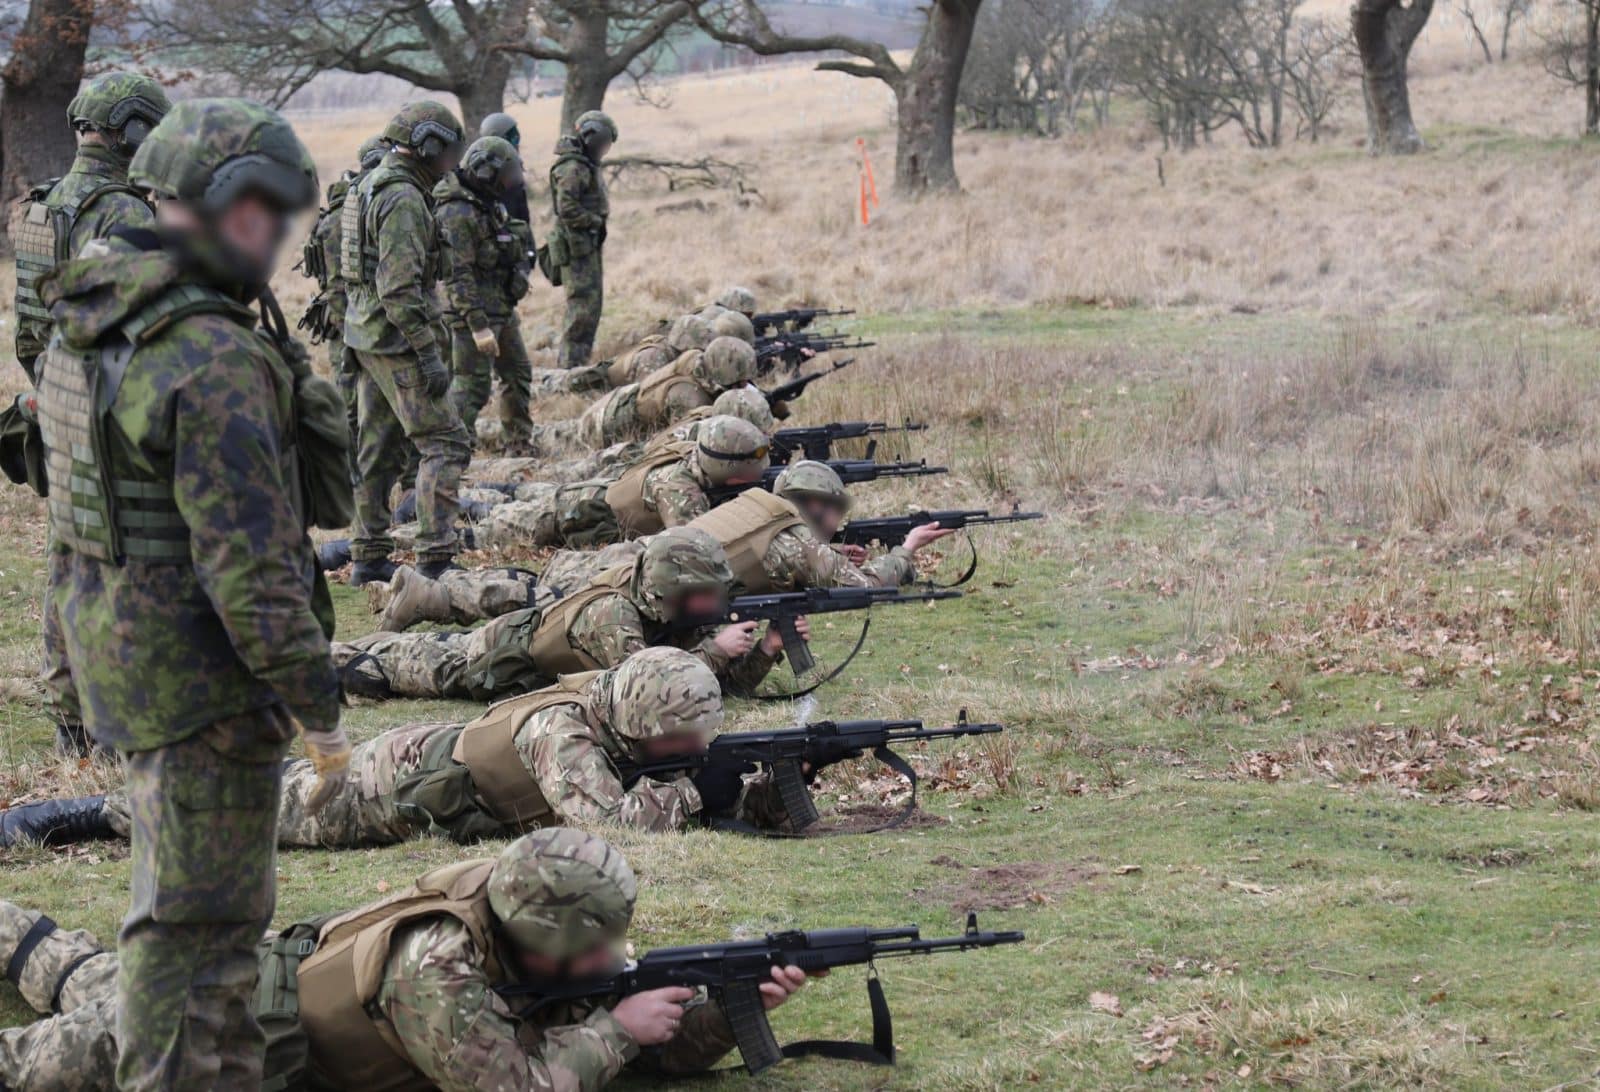 More than 10,000 Ukrainian soldiers were trained in Great Britain